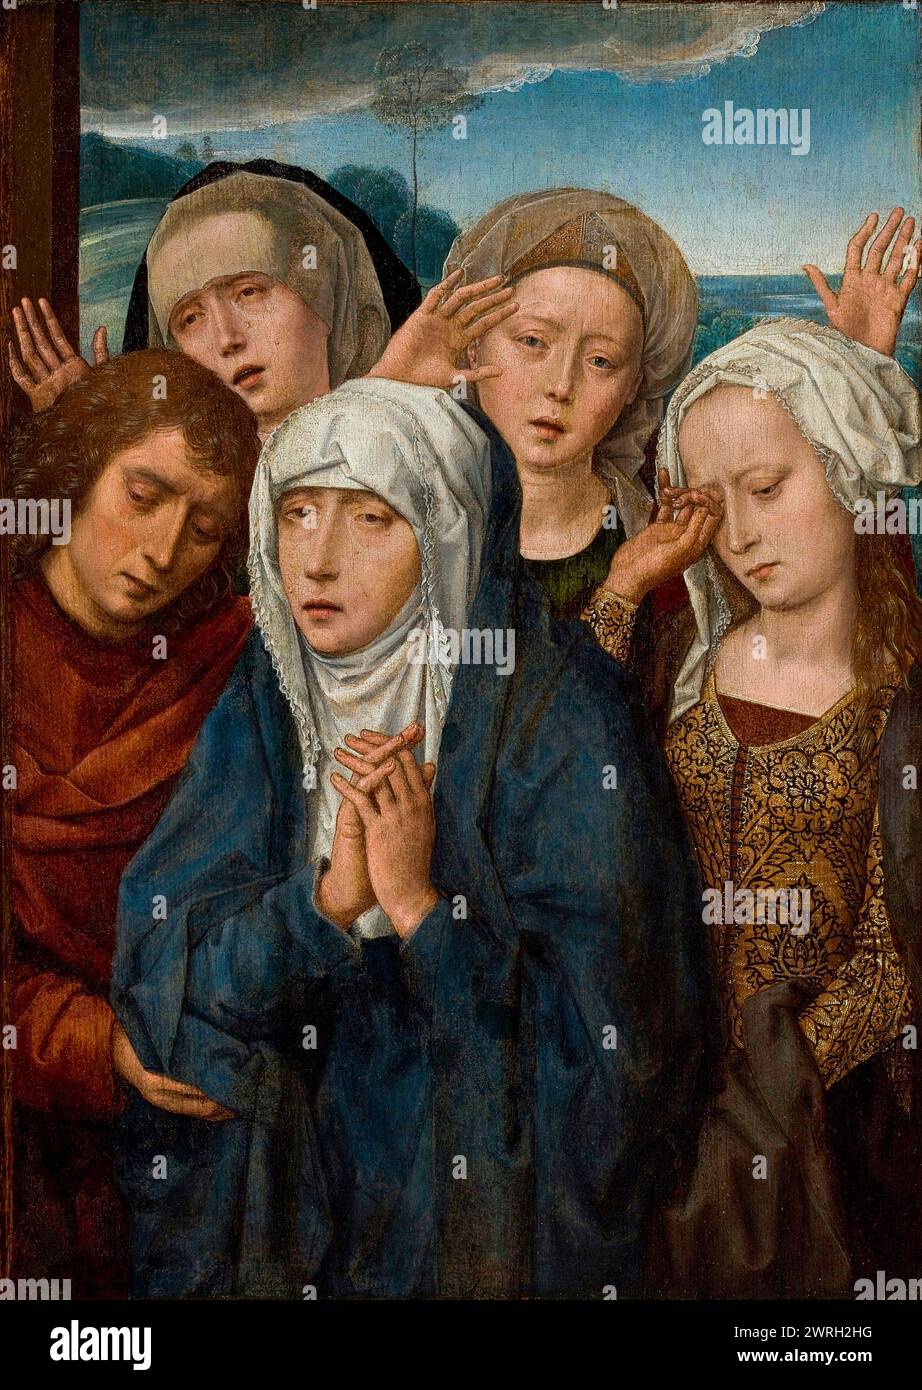 The Mourning Virgin with Saint John and the Pious Women from Galilee, 1485-1490. Found in the Collection of the Museu de Arte de S&#xe3;o Paulo. Stock Photo